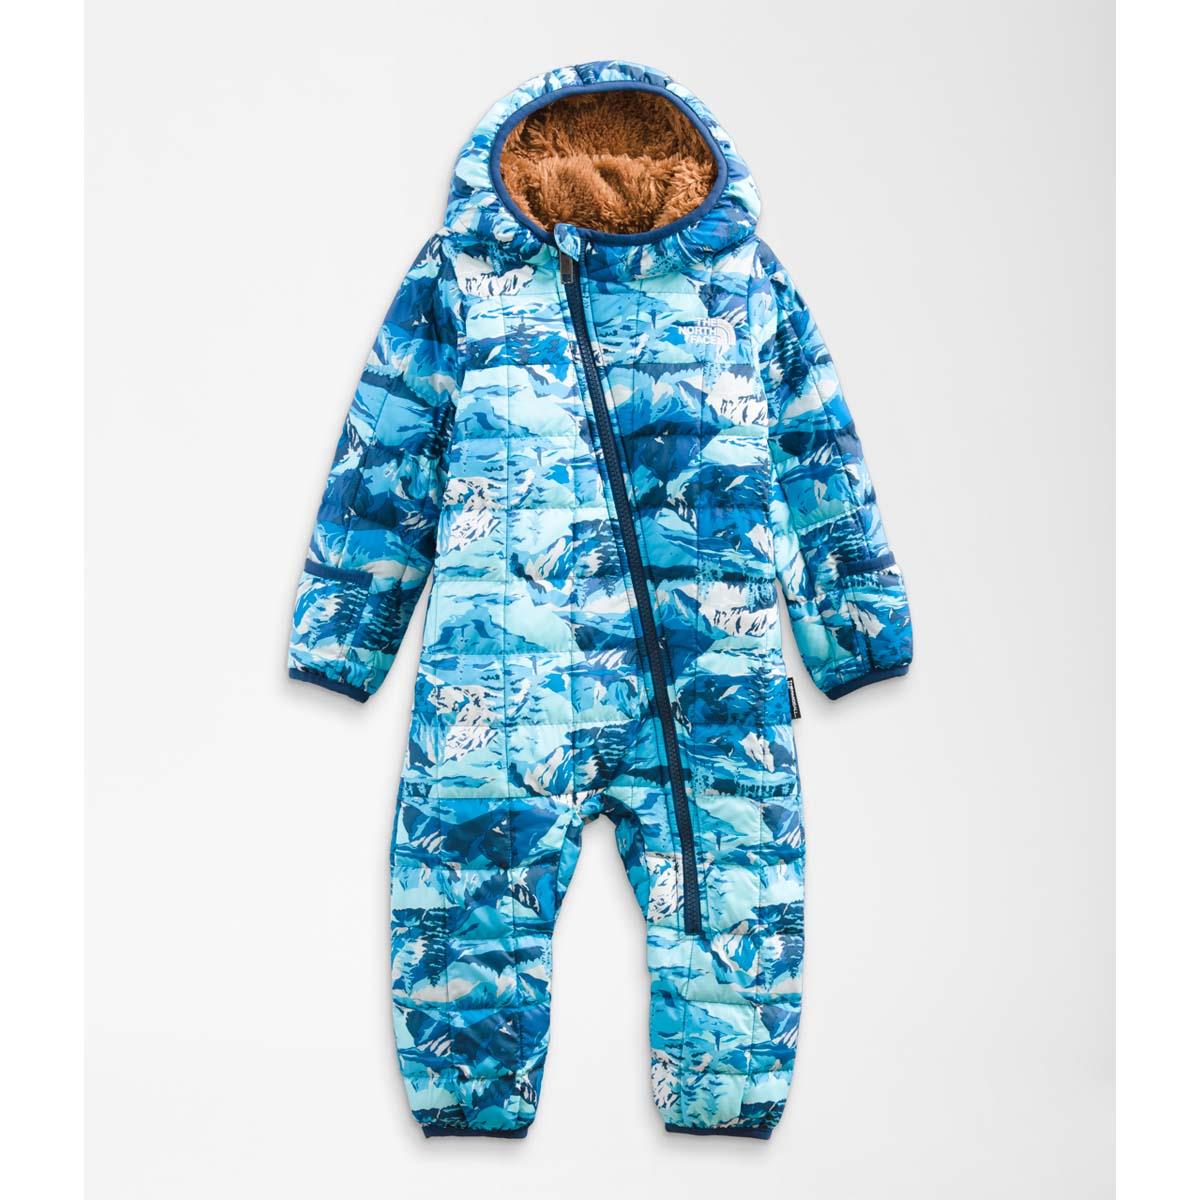 The North Face Thermal Suit set